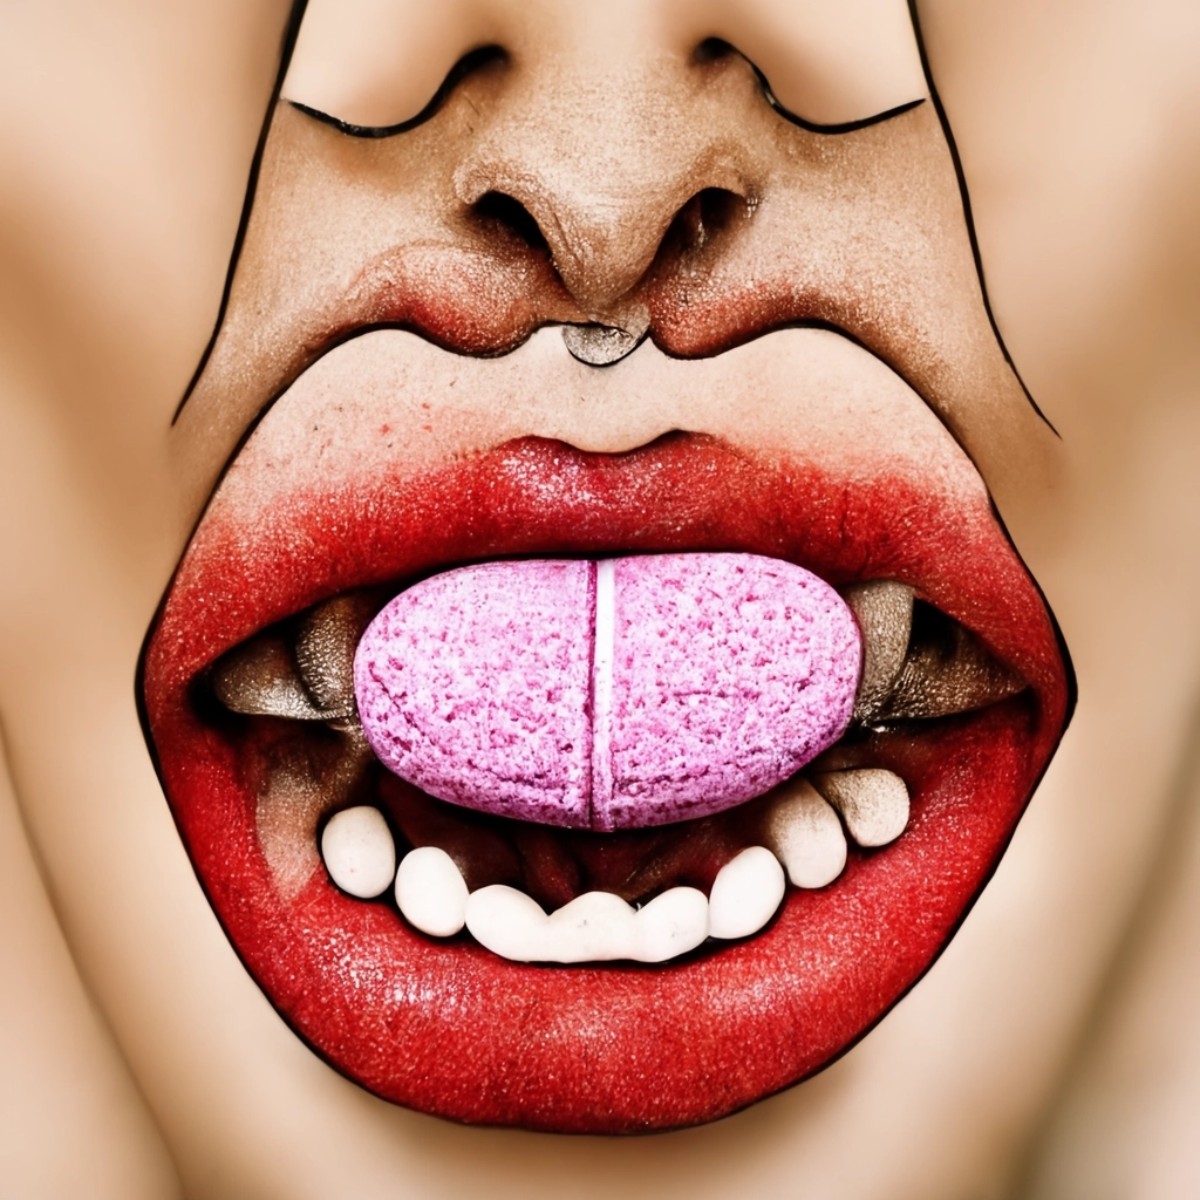 Close-up of open mouth with pill on tongue